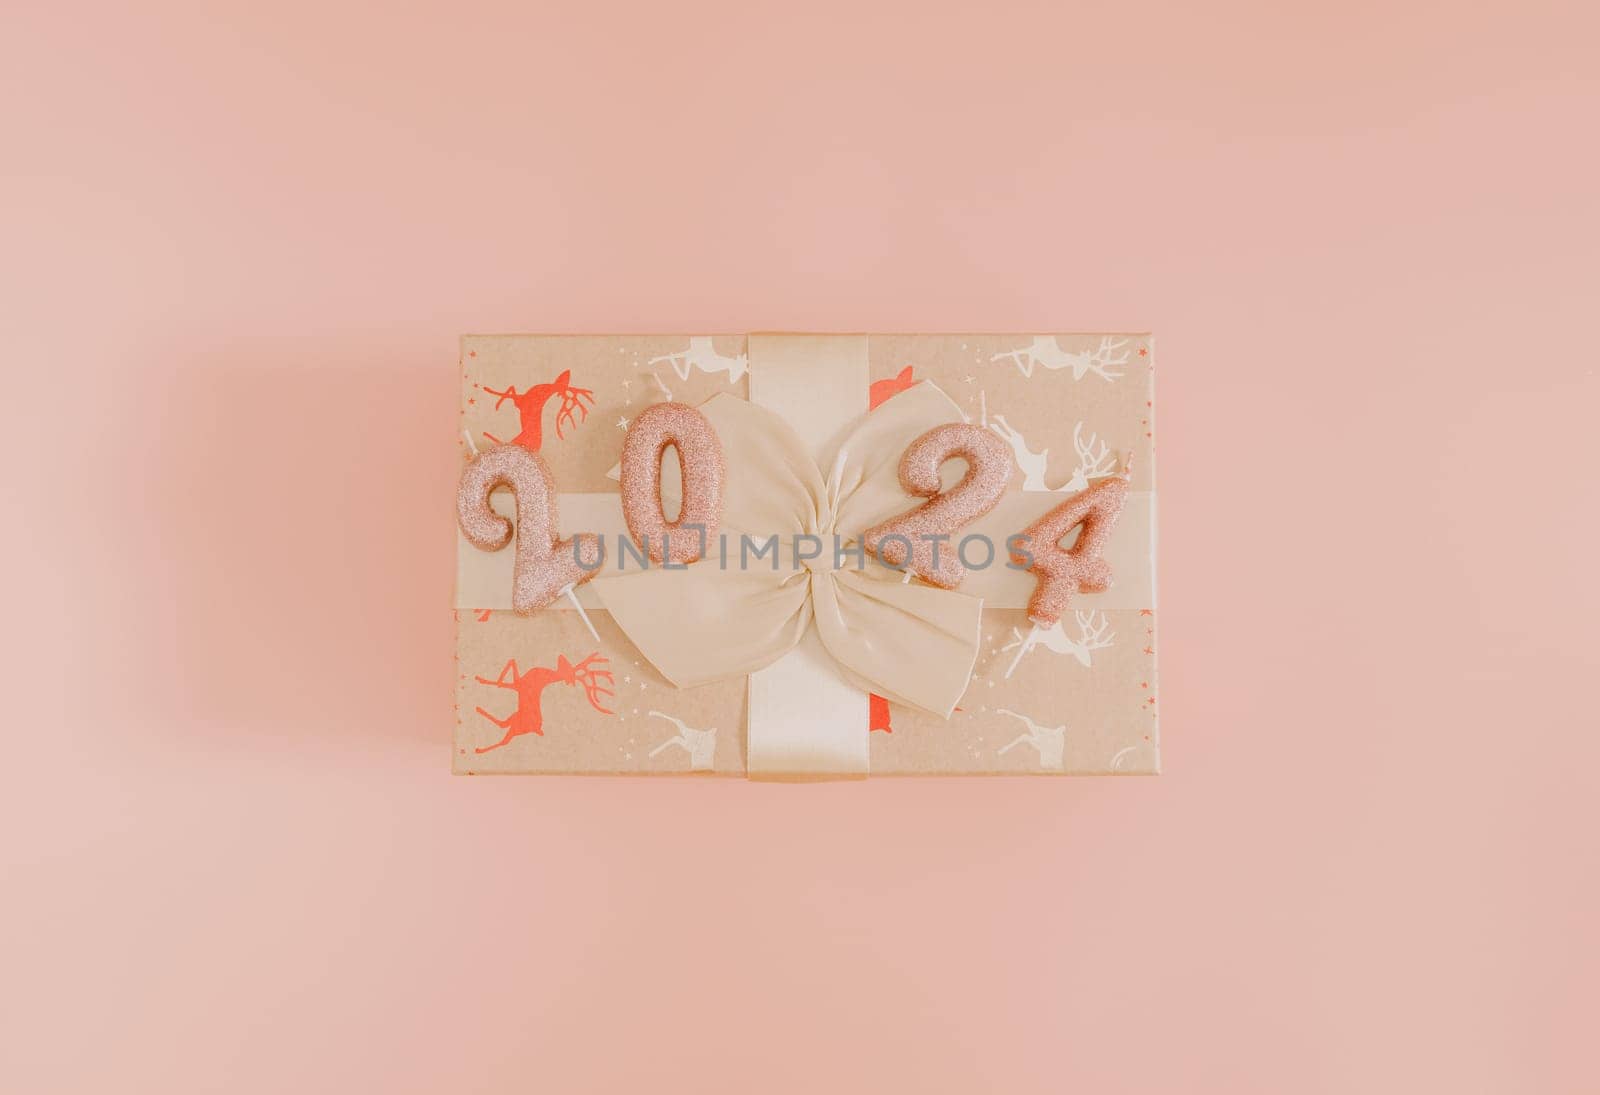 Shiny candles with the number 2024 on a gift box tied with a bow lie in the center on a pink background, flat lay close-up.